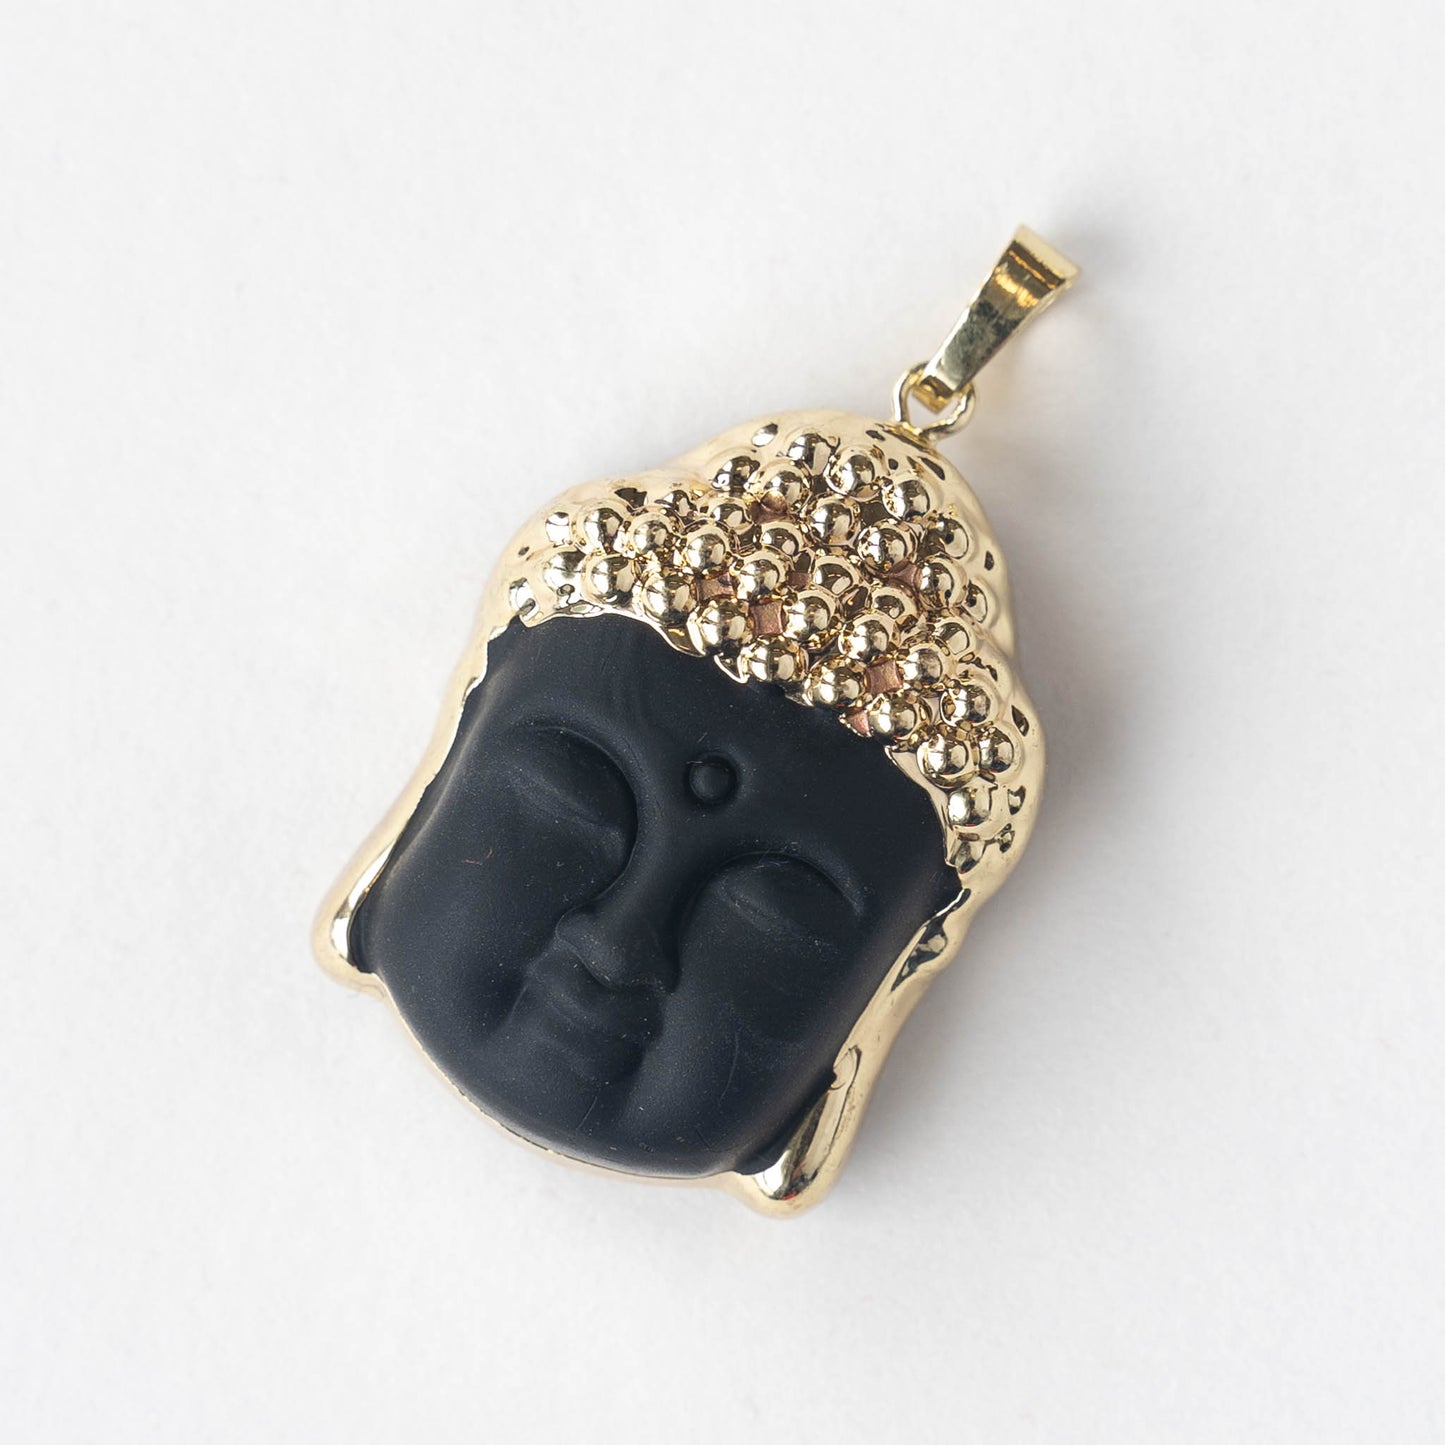 Peaceful Frosted Glass Buddha Pendant - Black